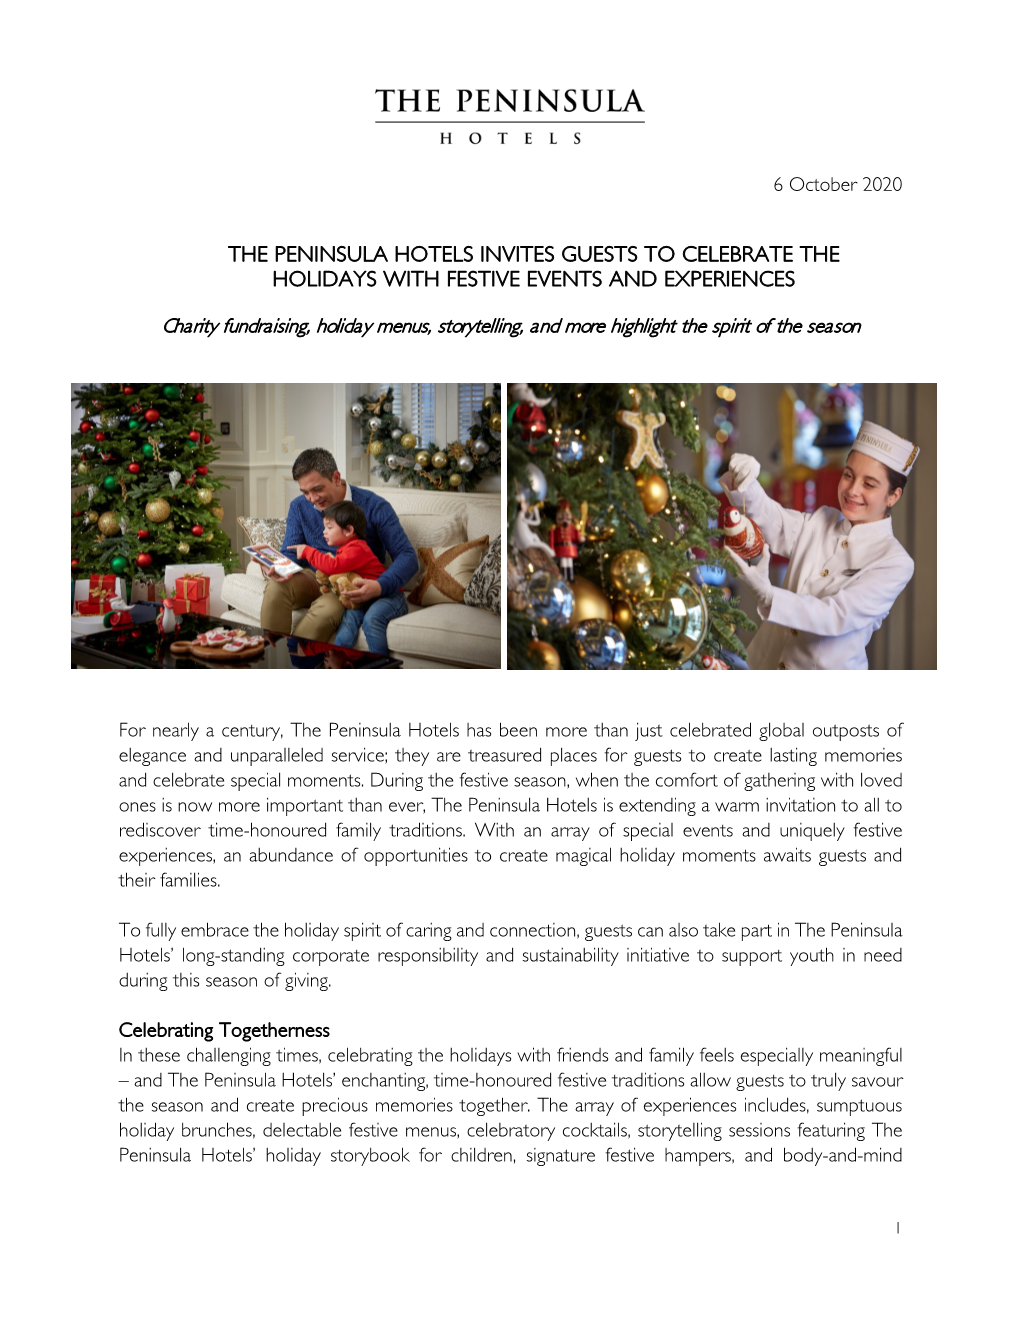 The Peninsula Hotels Invites Guests to Celebrate the Holidays with Festive Events and Experiences